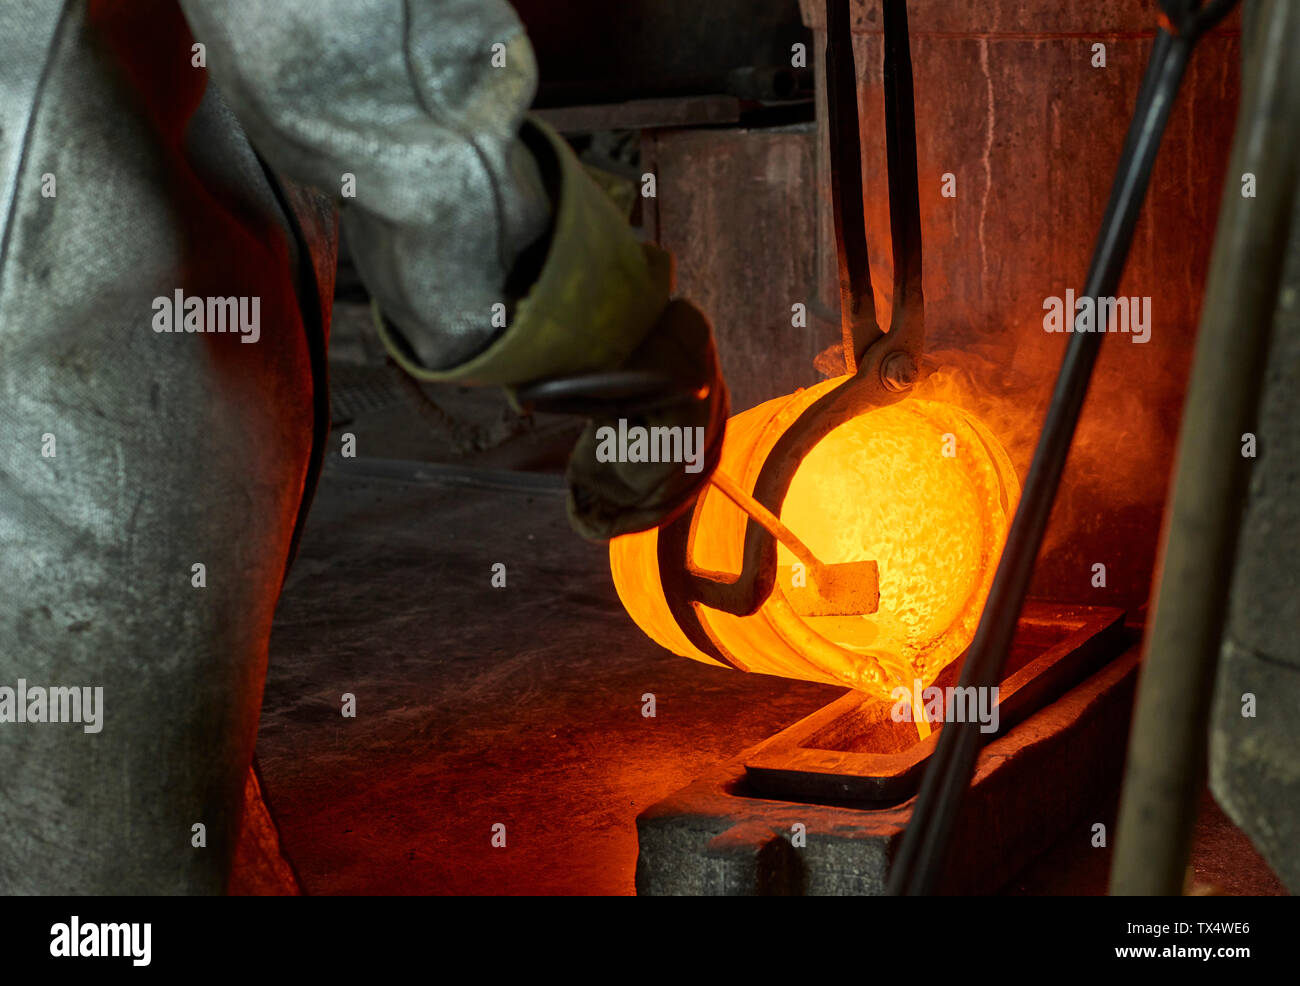 Industry, worker at furnace during melting copper, wearing a fire proximity suit Stock Photo